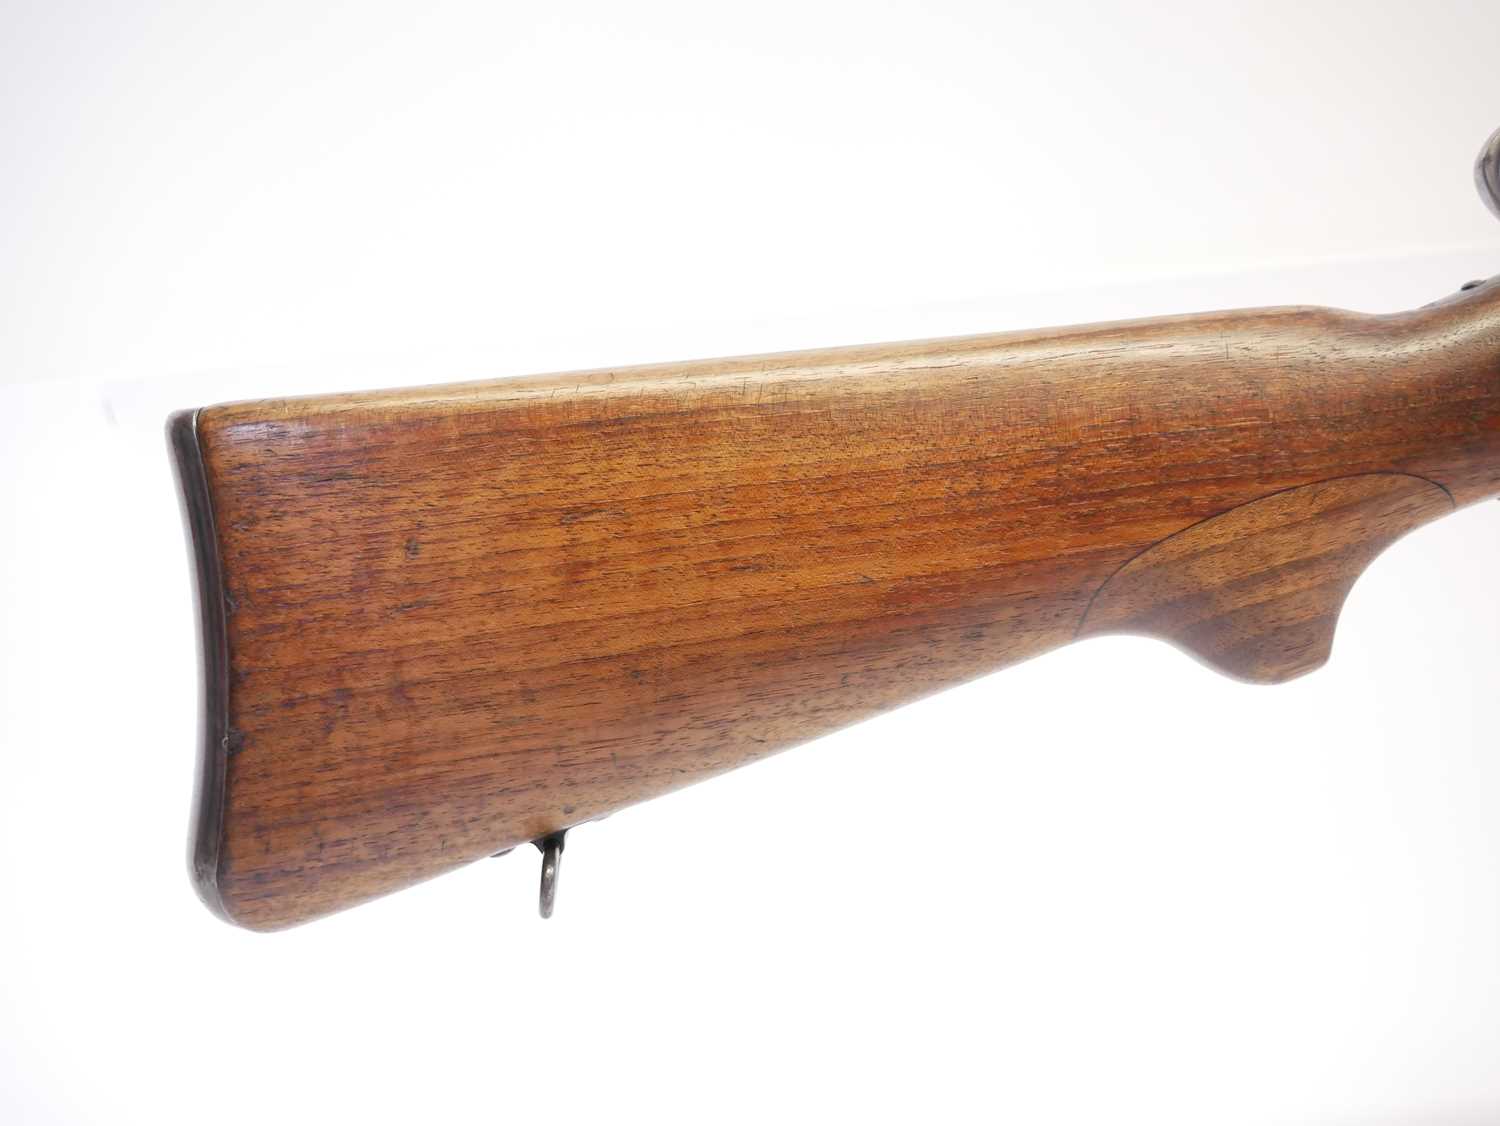 Schmidt Rubin 1896 7.5mm straight pull rifle, matching serial numbers 268510 to barrel, receiver, - Image 3 of 15